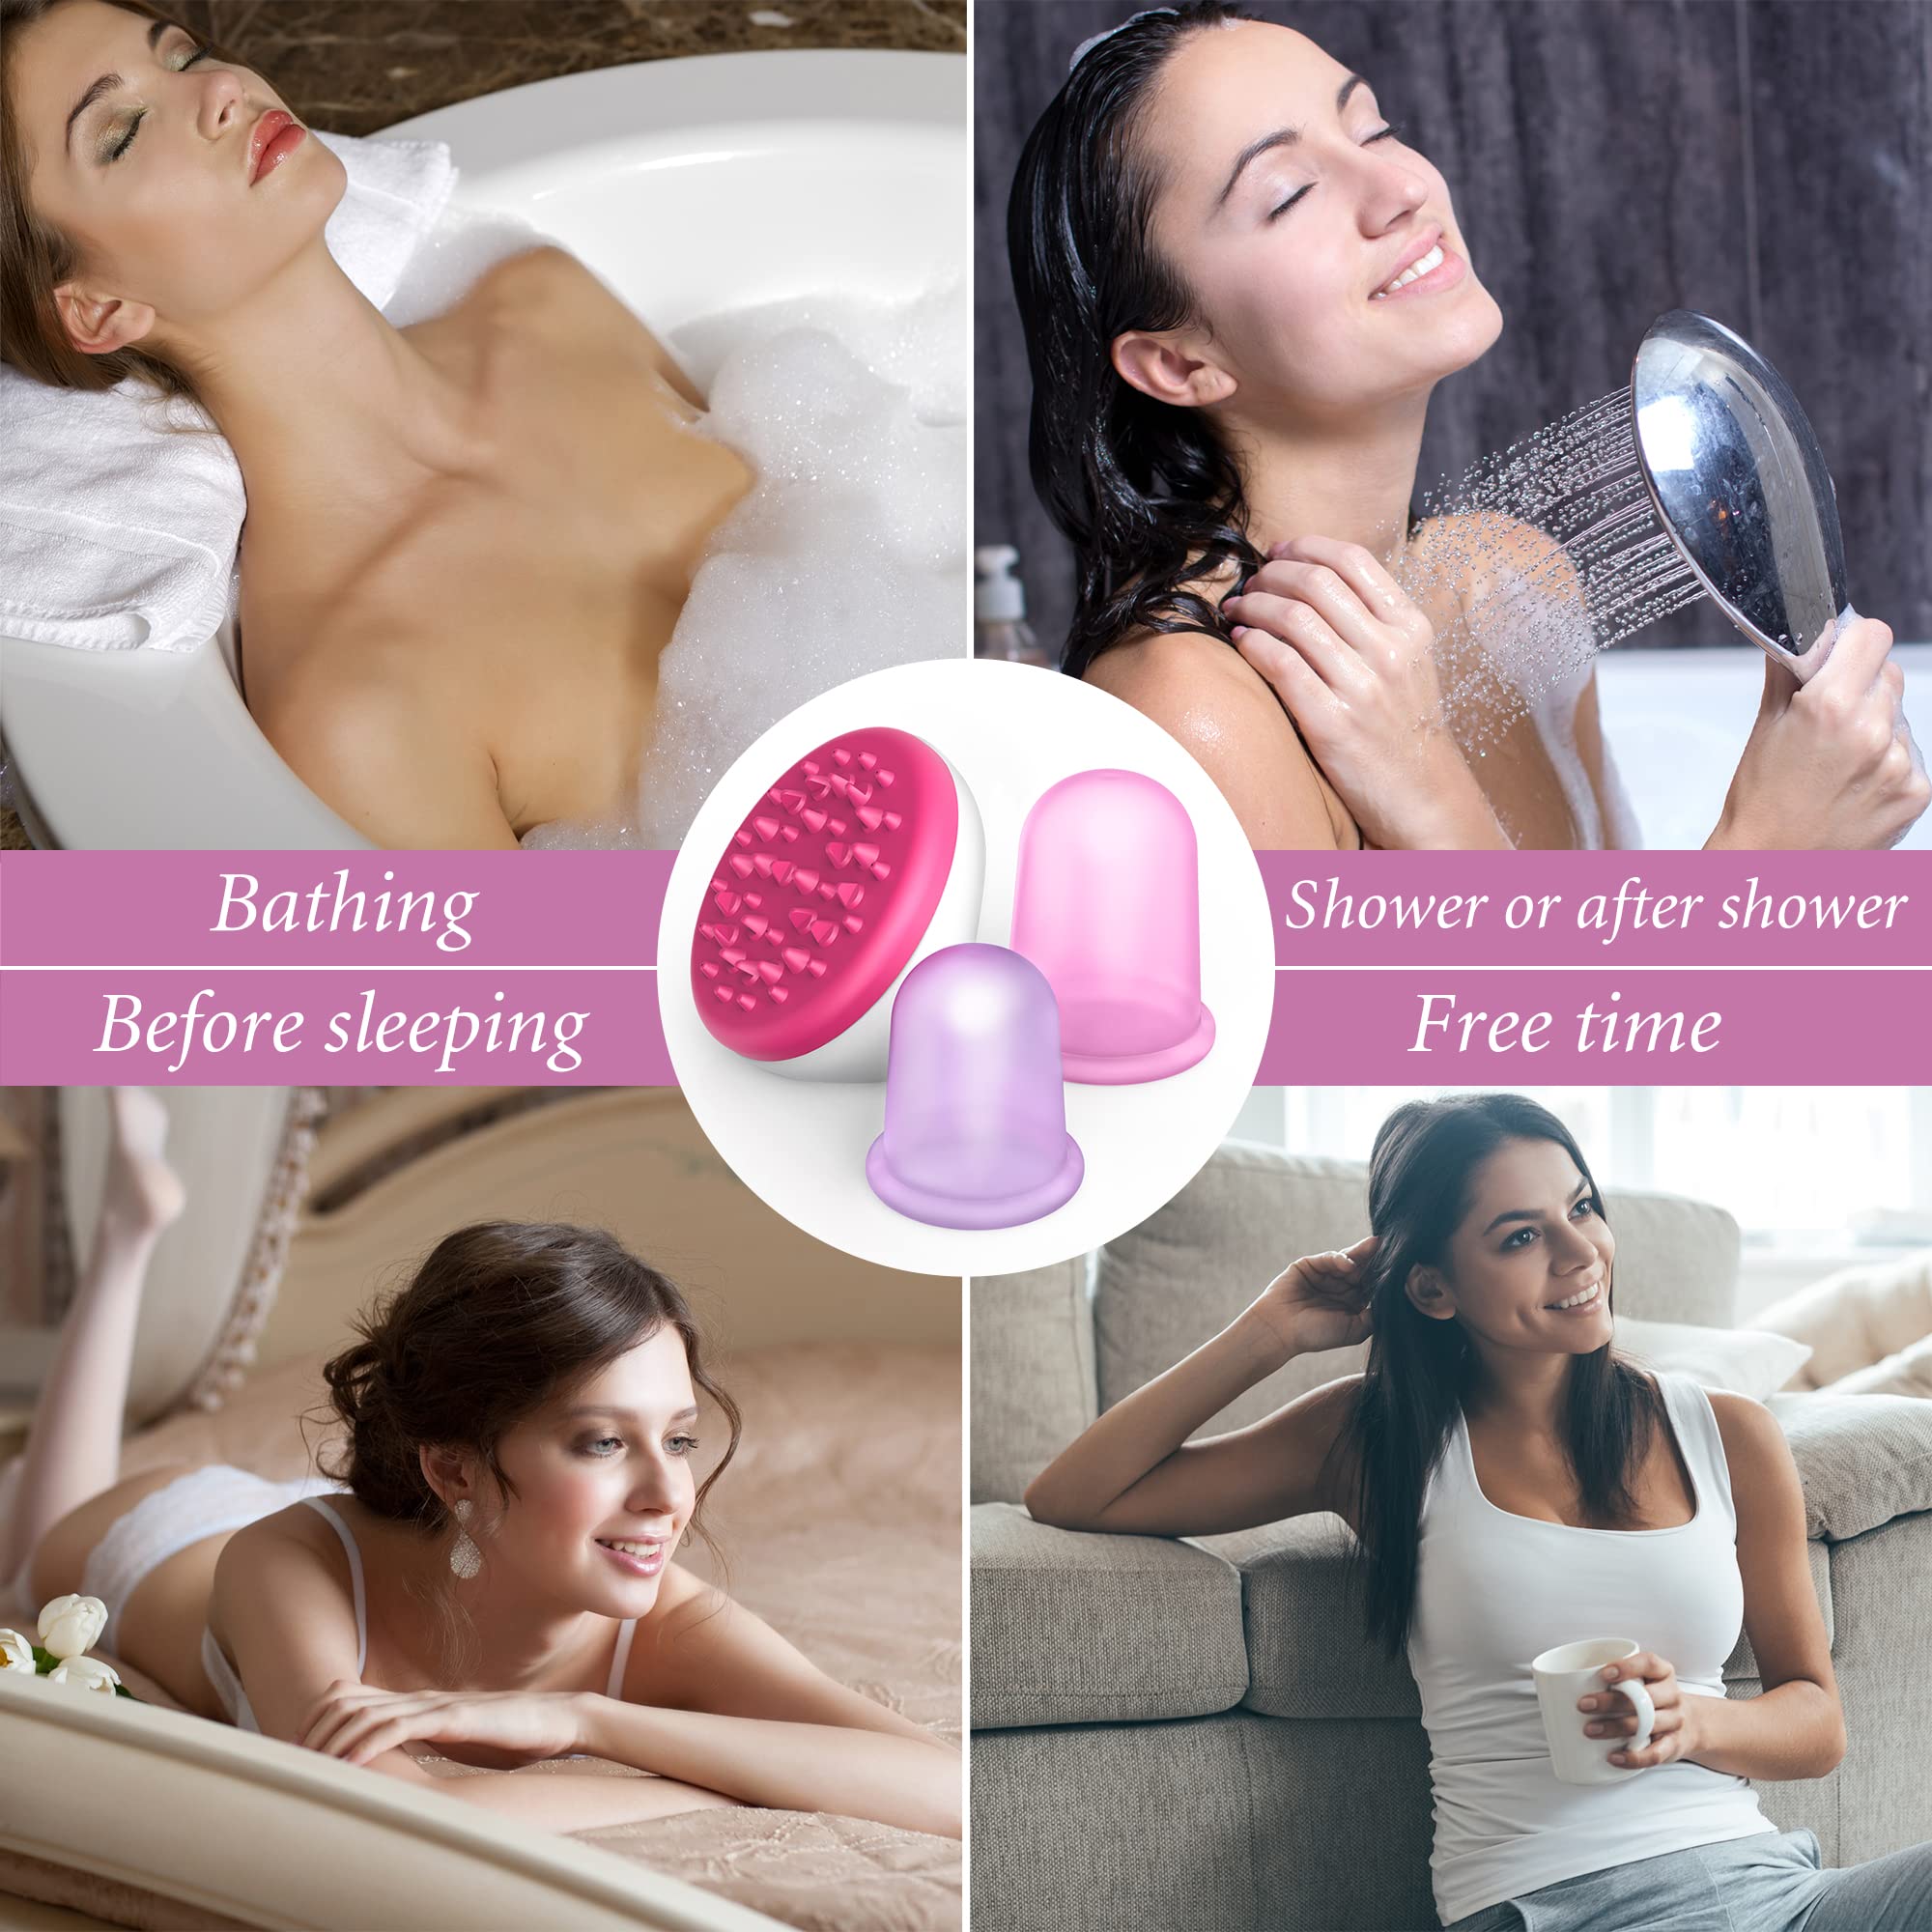 Anti Cellulite Massager Vacuum Suction Cups for Cellulite Treatment - Body Massager, Exfoliator, Cupping Therapy Set - Improve Circulation, Distribute Fat Deposits, Shower Scrubber, Cellulite Remover